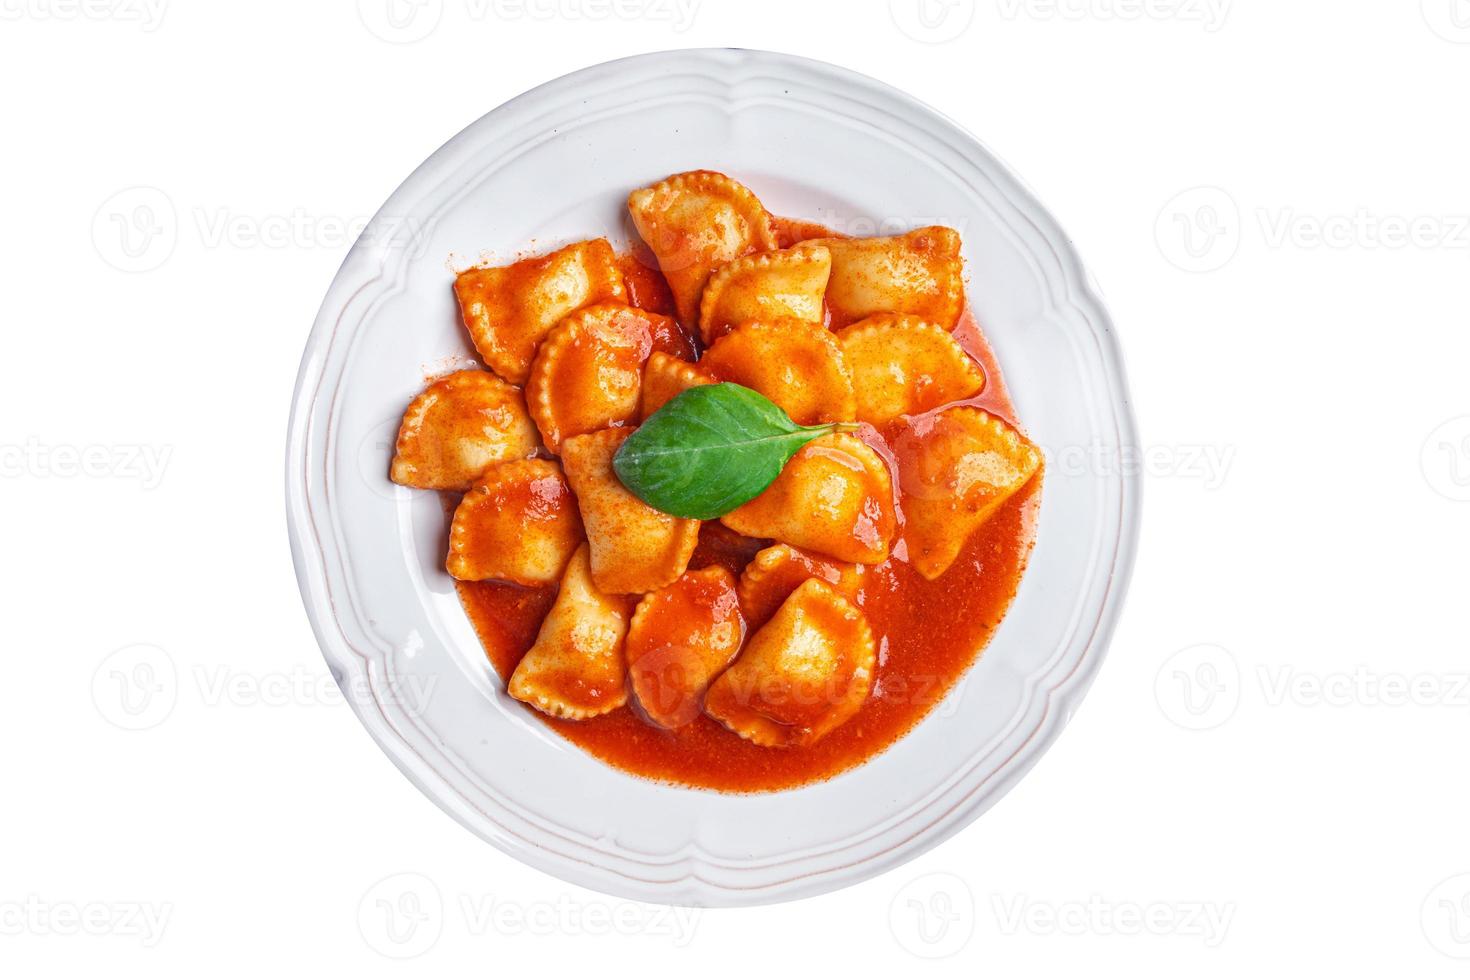 ravioli fish stuffed pasta tomato sauce fresh dish healthy meal food snack diet on the table copy space food background photo